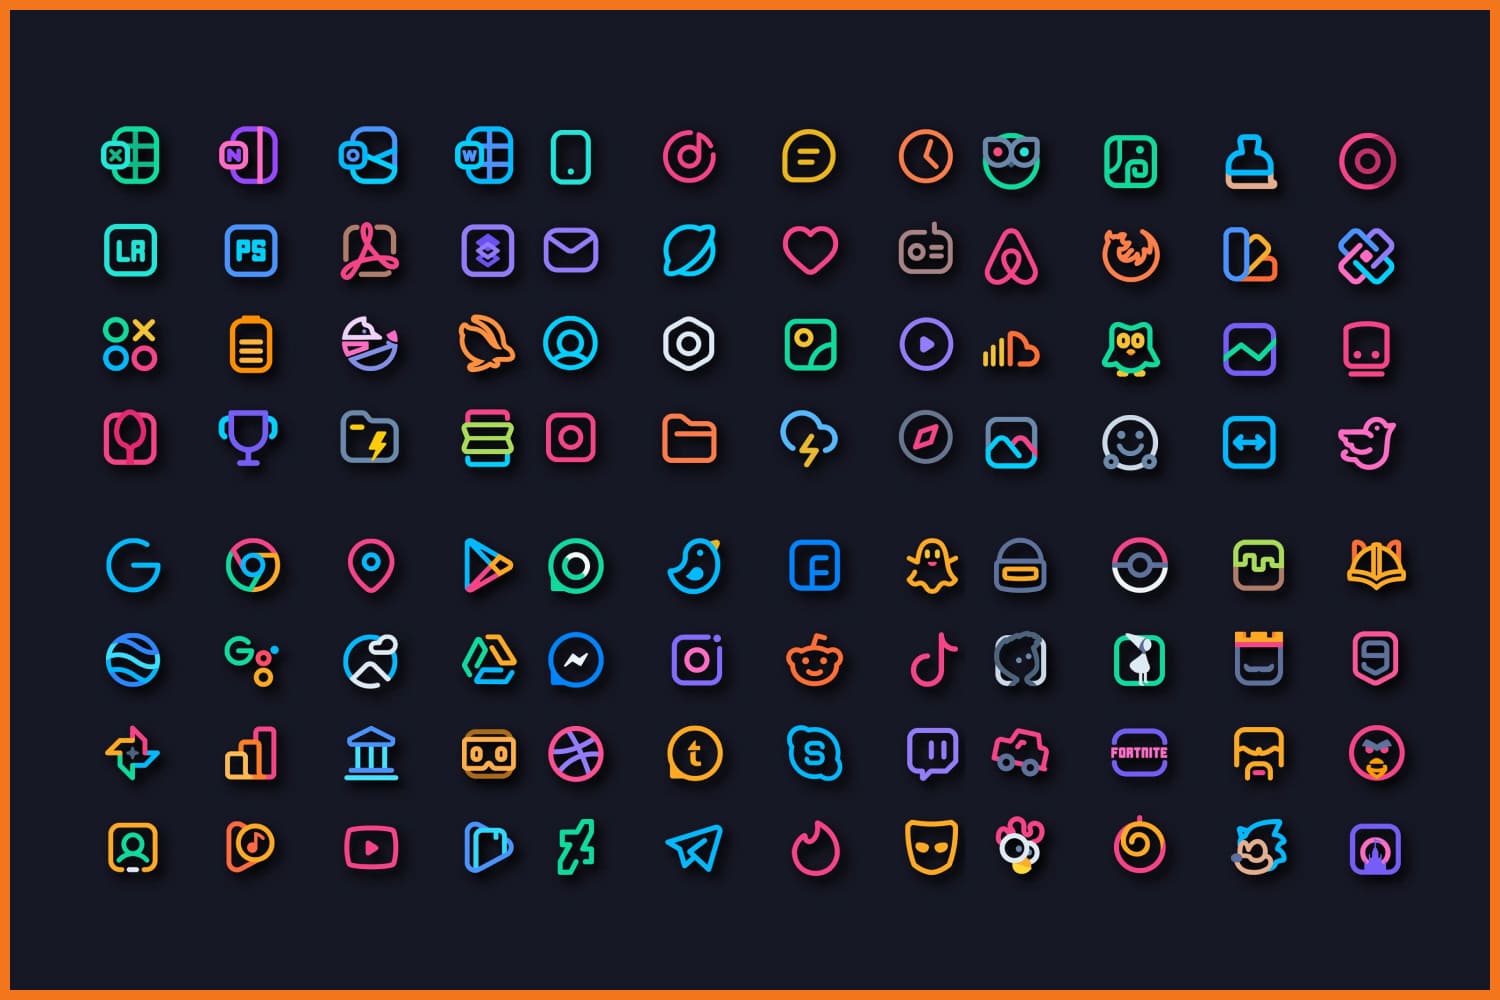 A collage of icons in a minimalistic hand-drawn style on a blue background.